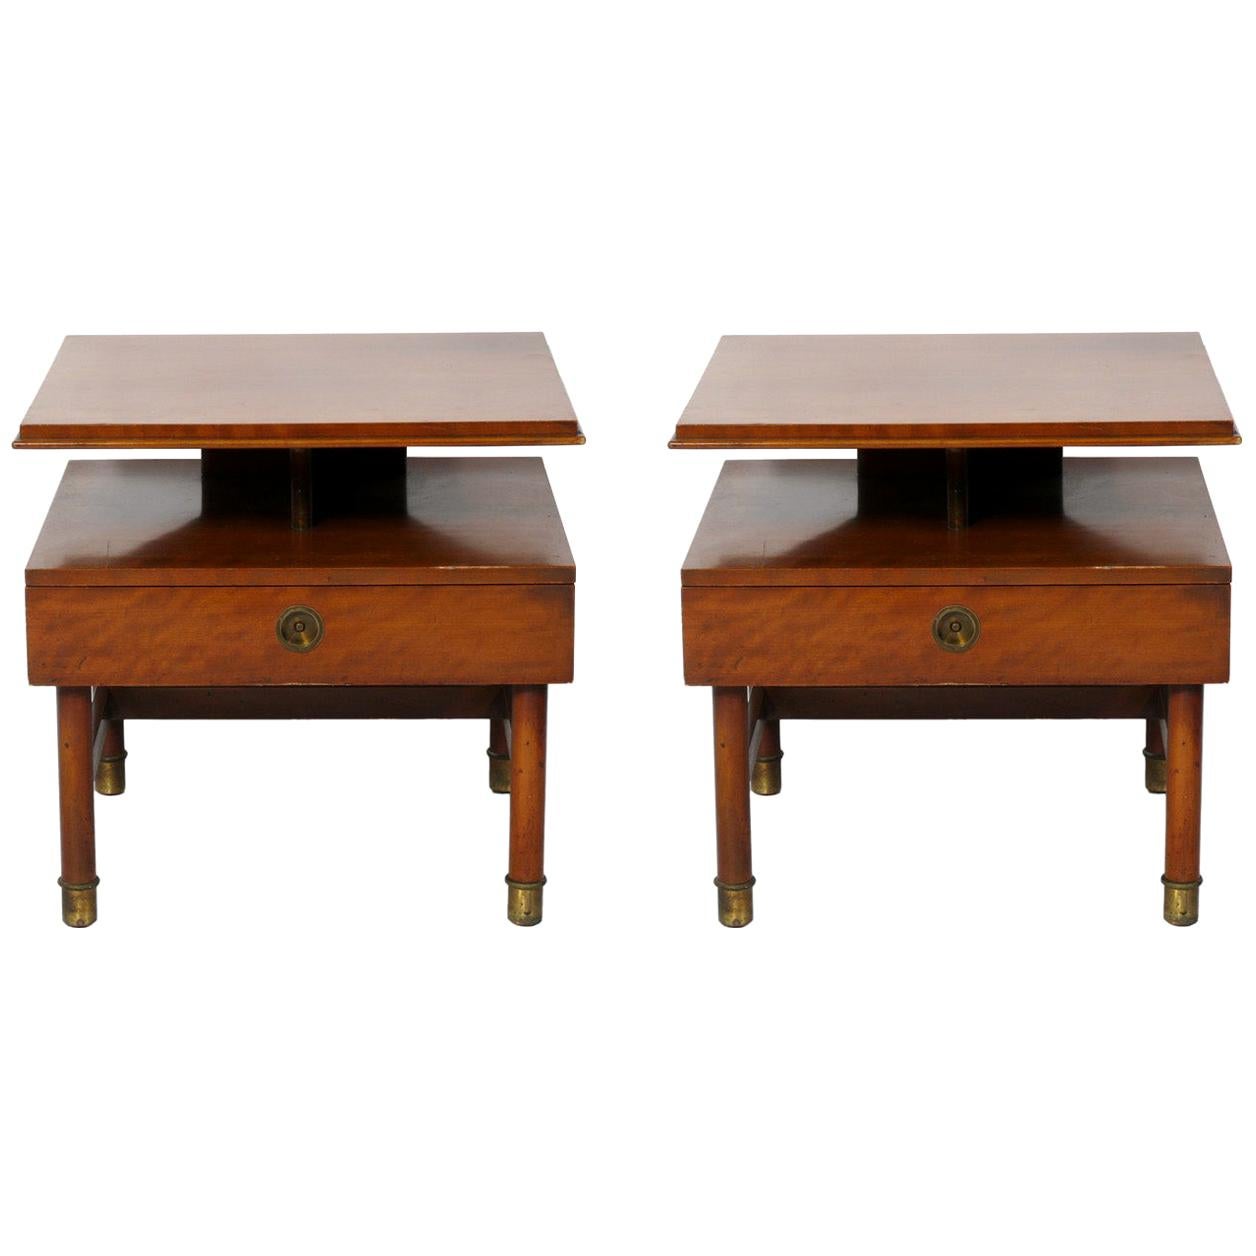 Pair of Clean Lined Nightstands or End Tables by Renzo Rutili